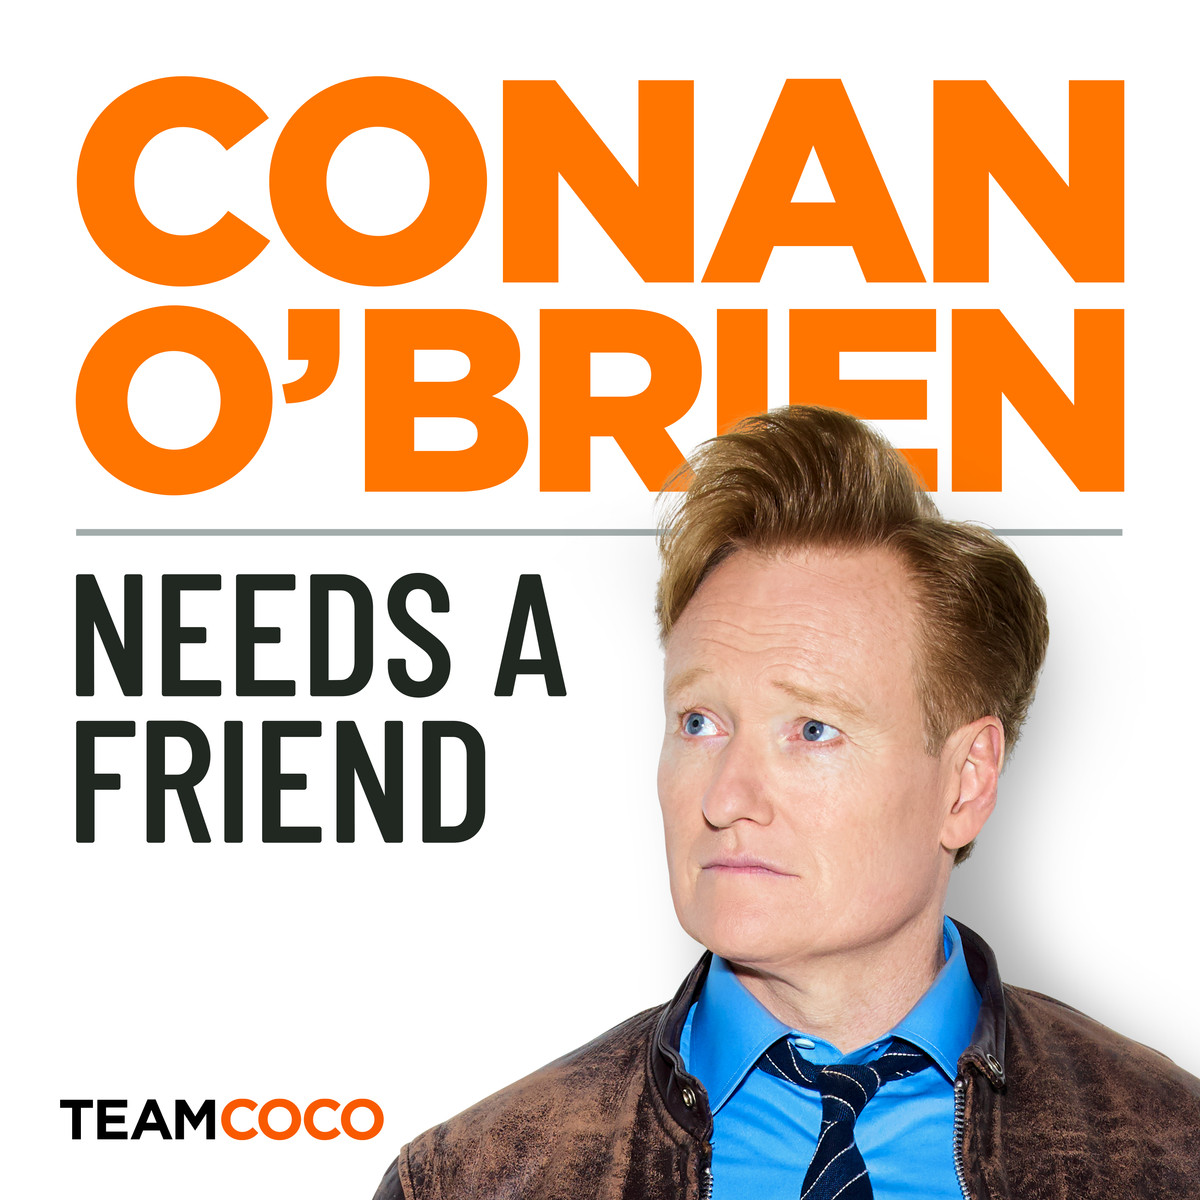 Conan OBrien promo image for his podcast series